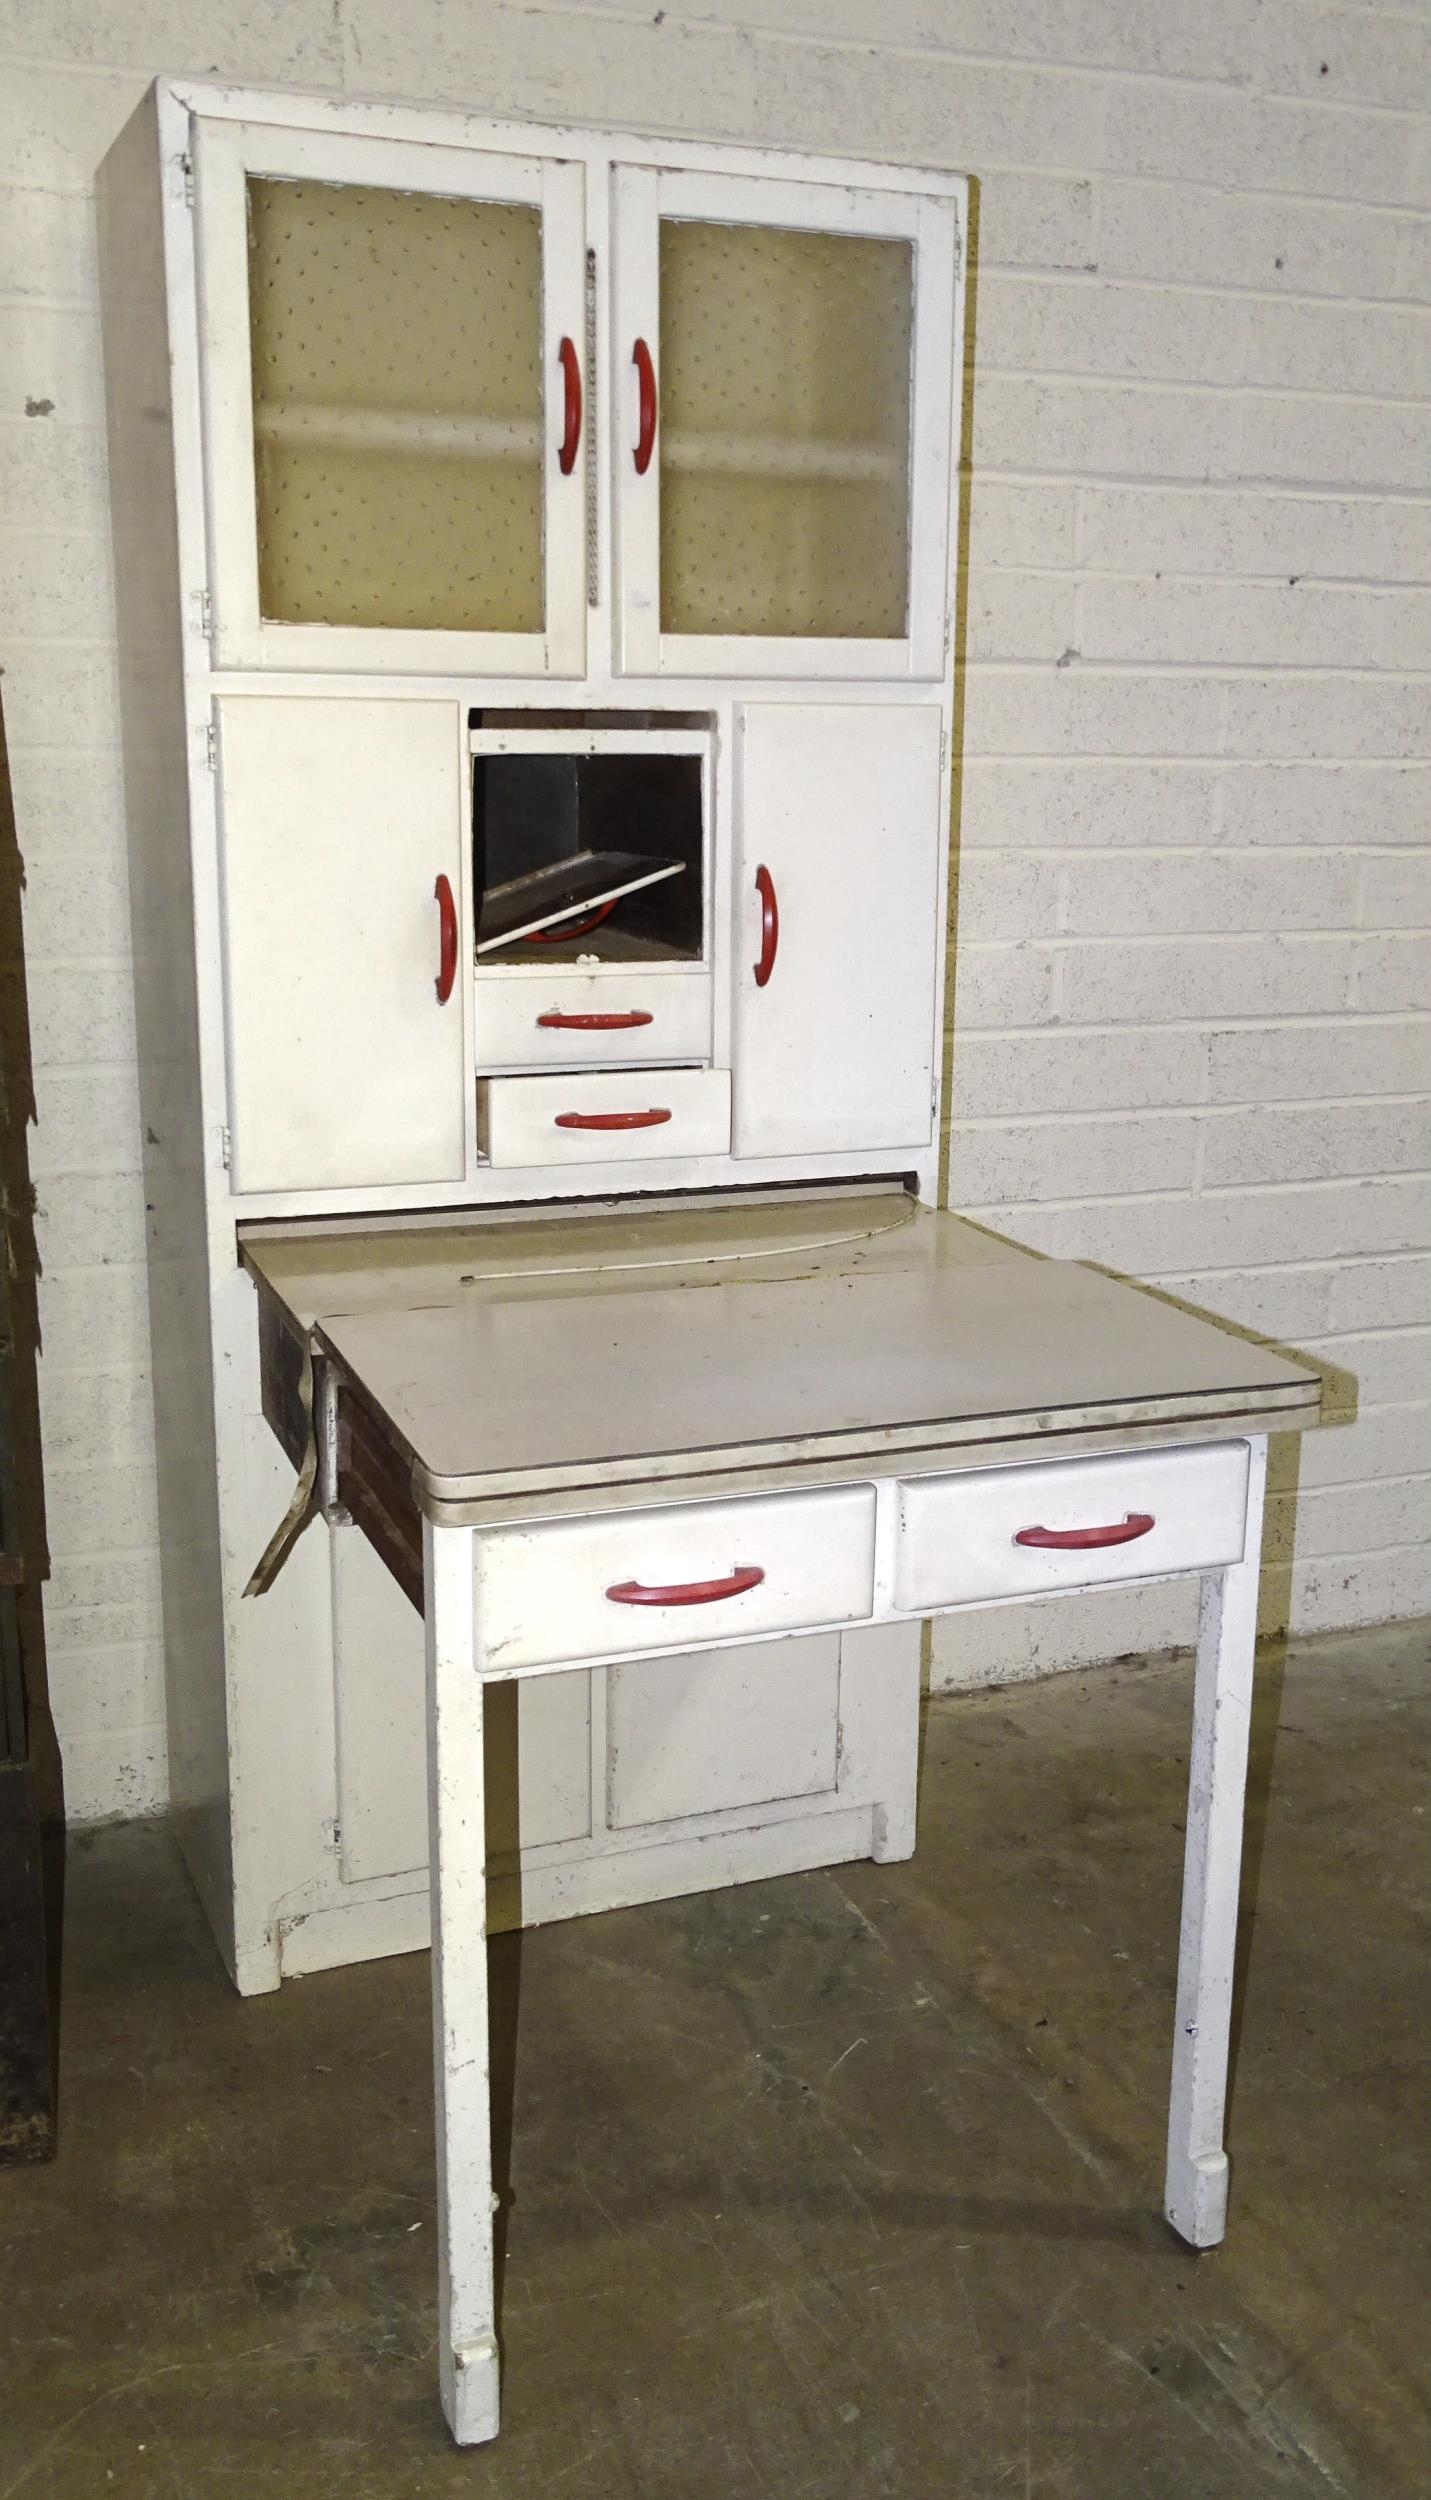 A 1950's painted kitchen cabinet with pull-out work surface.